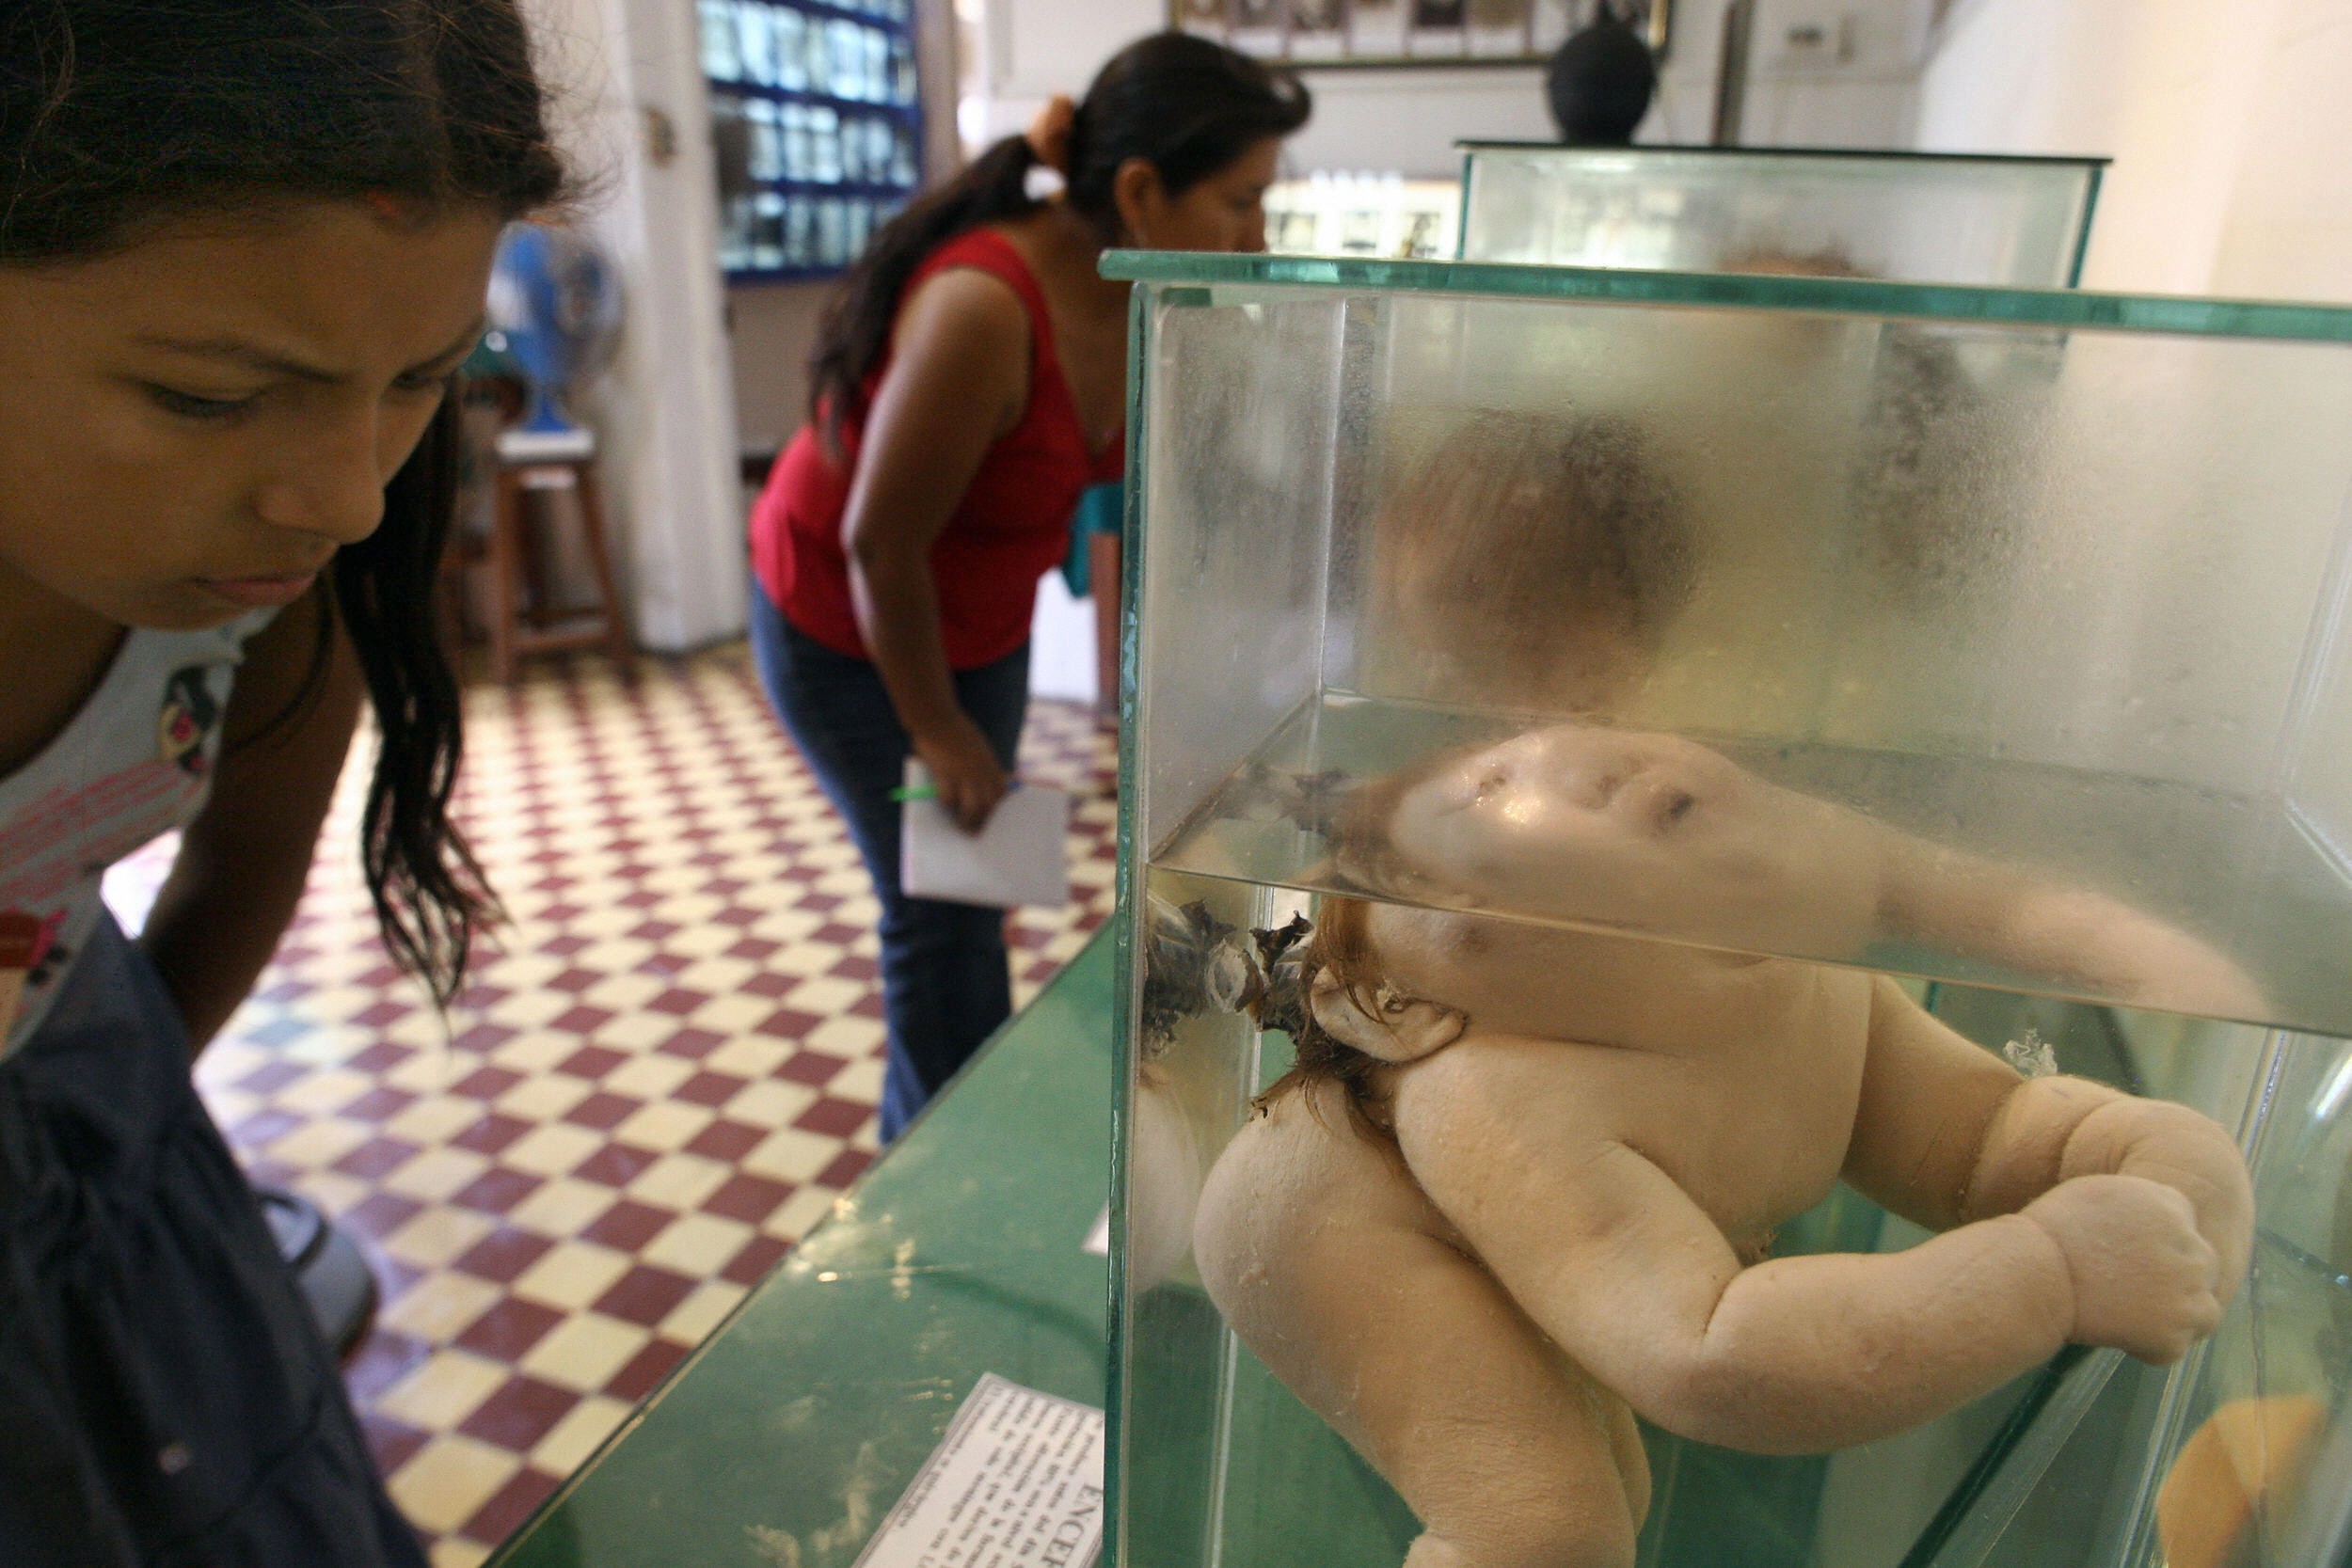 Lima, PERU: Visitors look at a human foetuses on display at the Museum of the Brain 03 March, 2005 in Lima. The museum's collection, recently open to the public, has 2,841 parts of human brains affected by diverse pathologies and are meant for analysis and study of the organ. AFP PHOTO/EITAN ABRAMOVICH (Photo credit should read EITAN ABRAMOVICH/AFP via Getty Images)